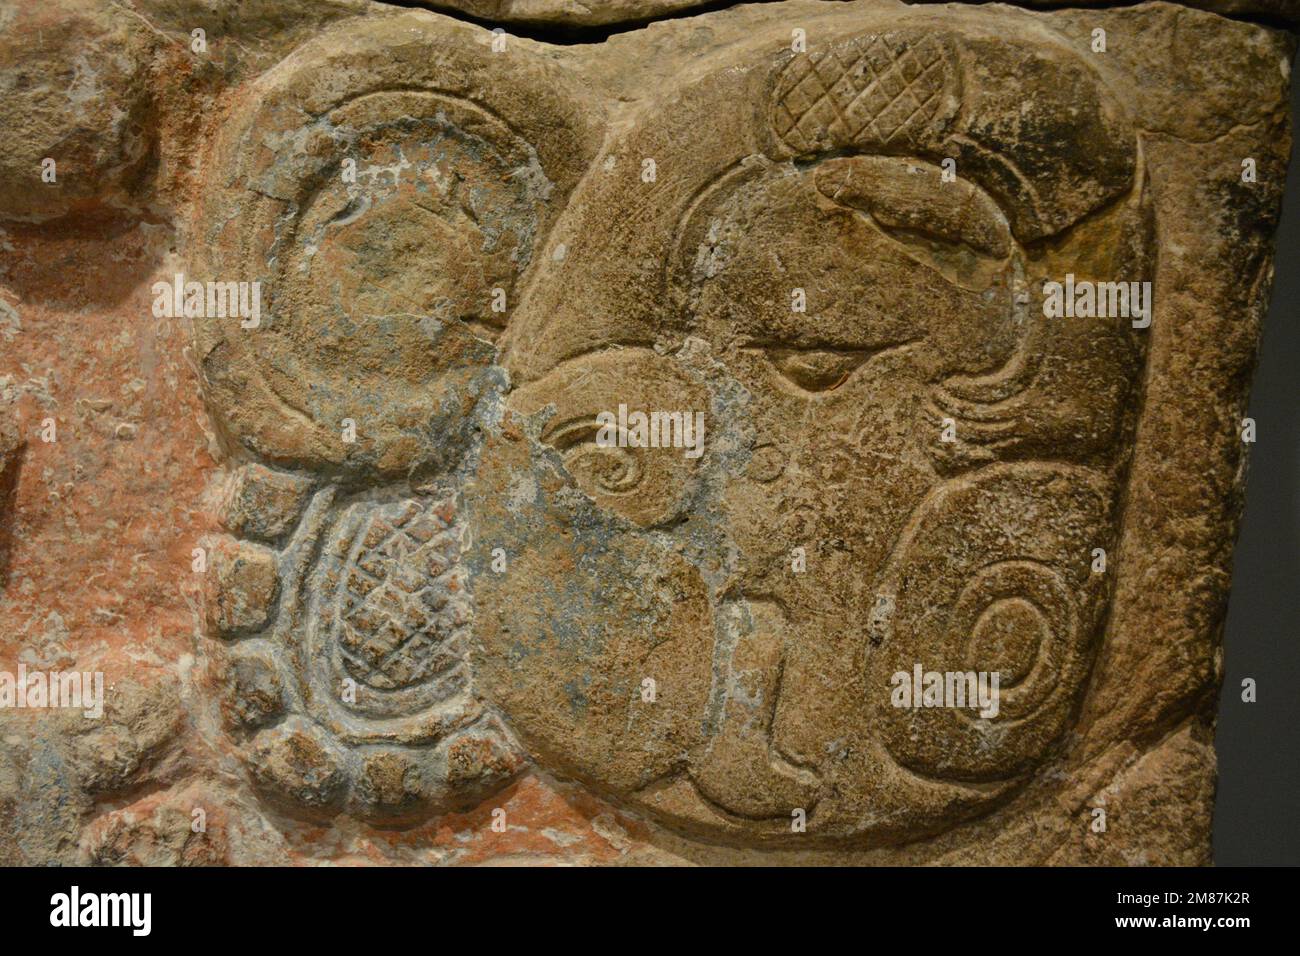 Maya Glyphs with pigments from Pomona Archaeological Site in Tabasco Mexico. Precolumbian art in the Dallas Museum of Art, Dallas Texas Stock Photo